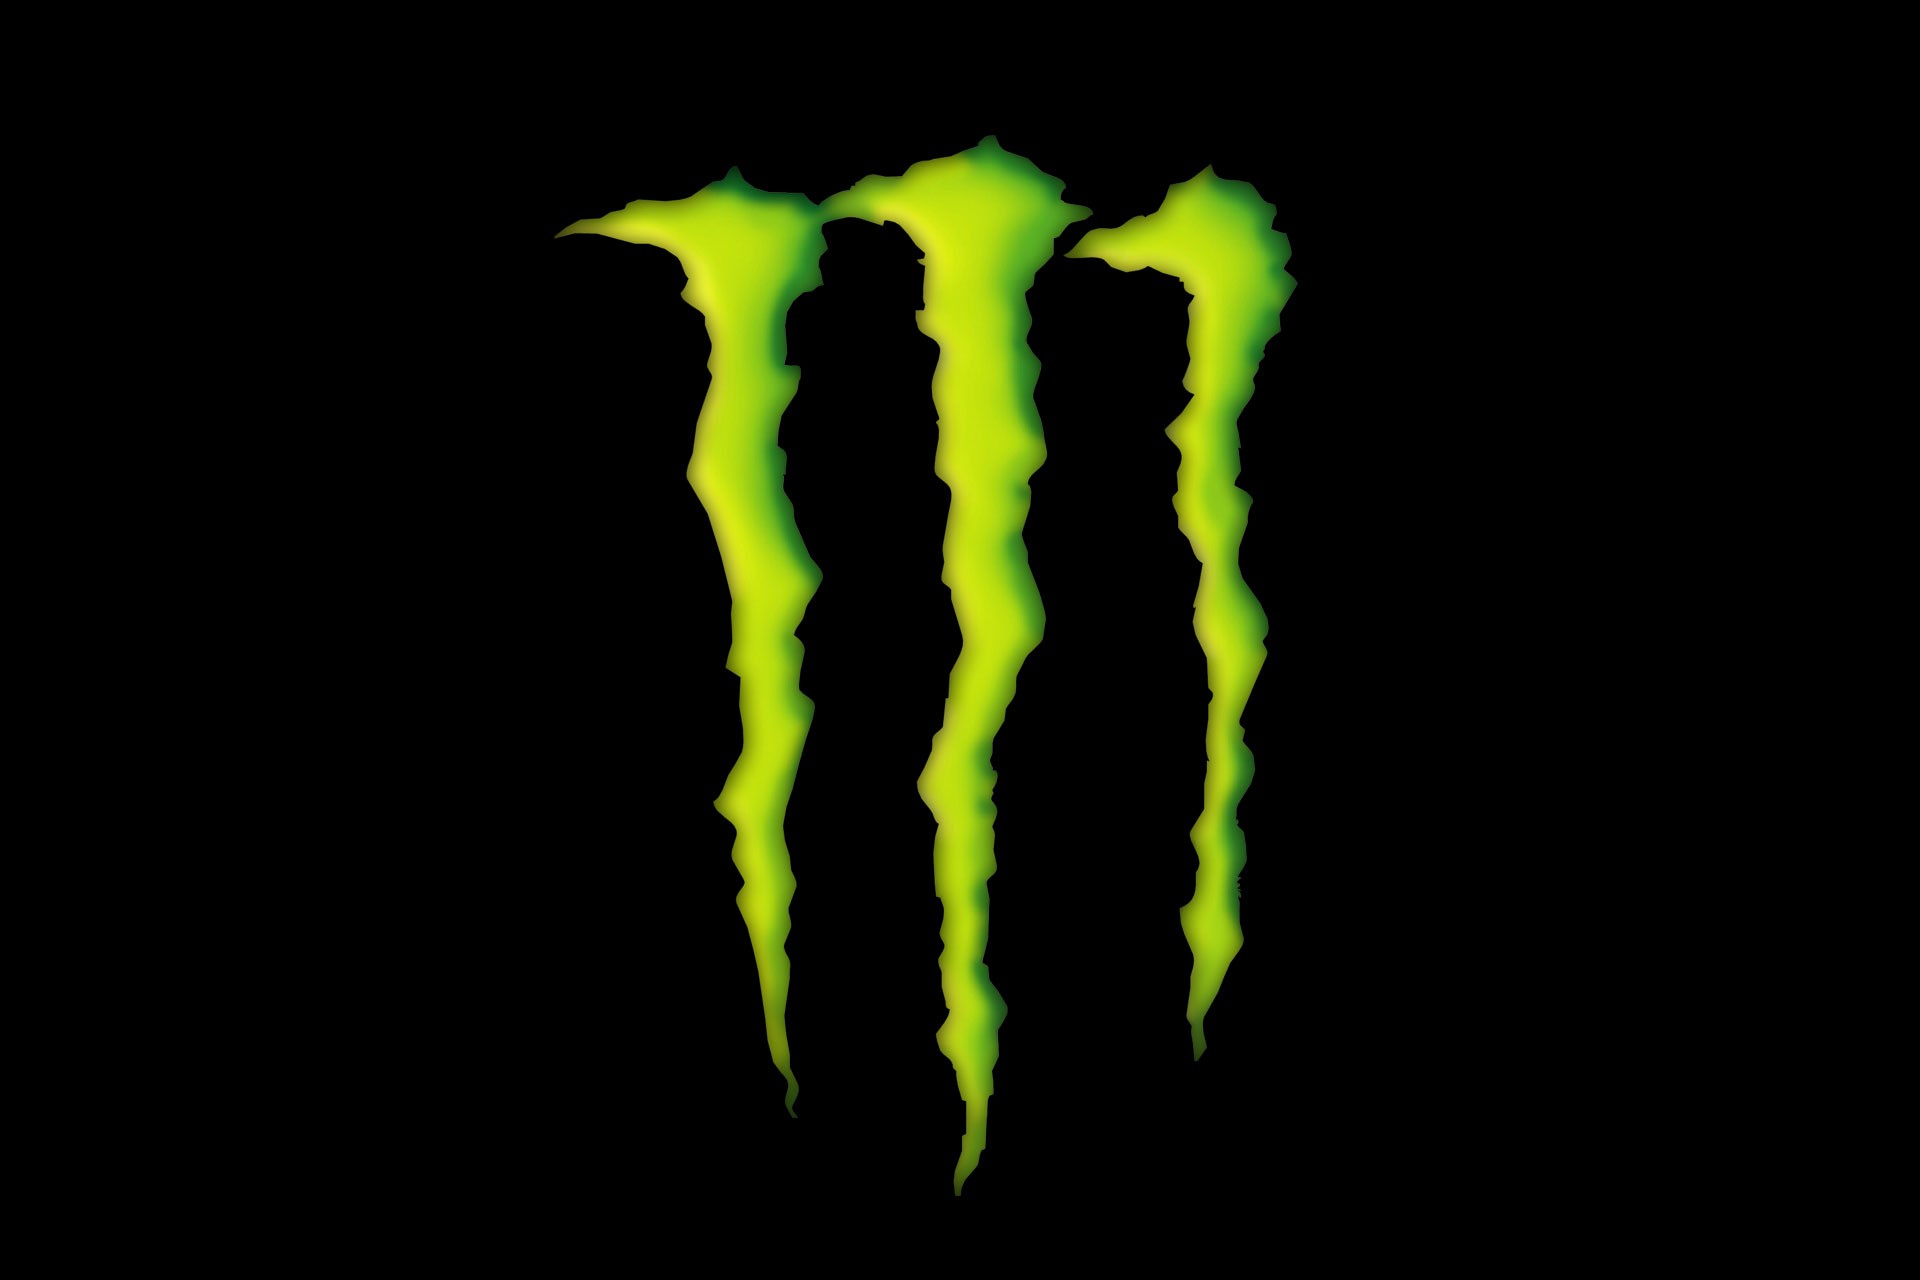 Monster Energy Drink Logo In 3d Wallpaper For Amazon Kindle Fire HD